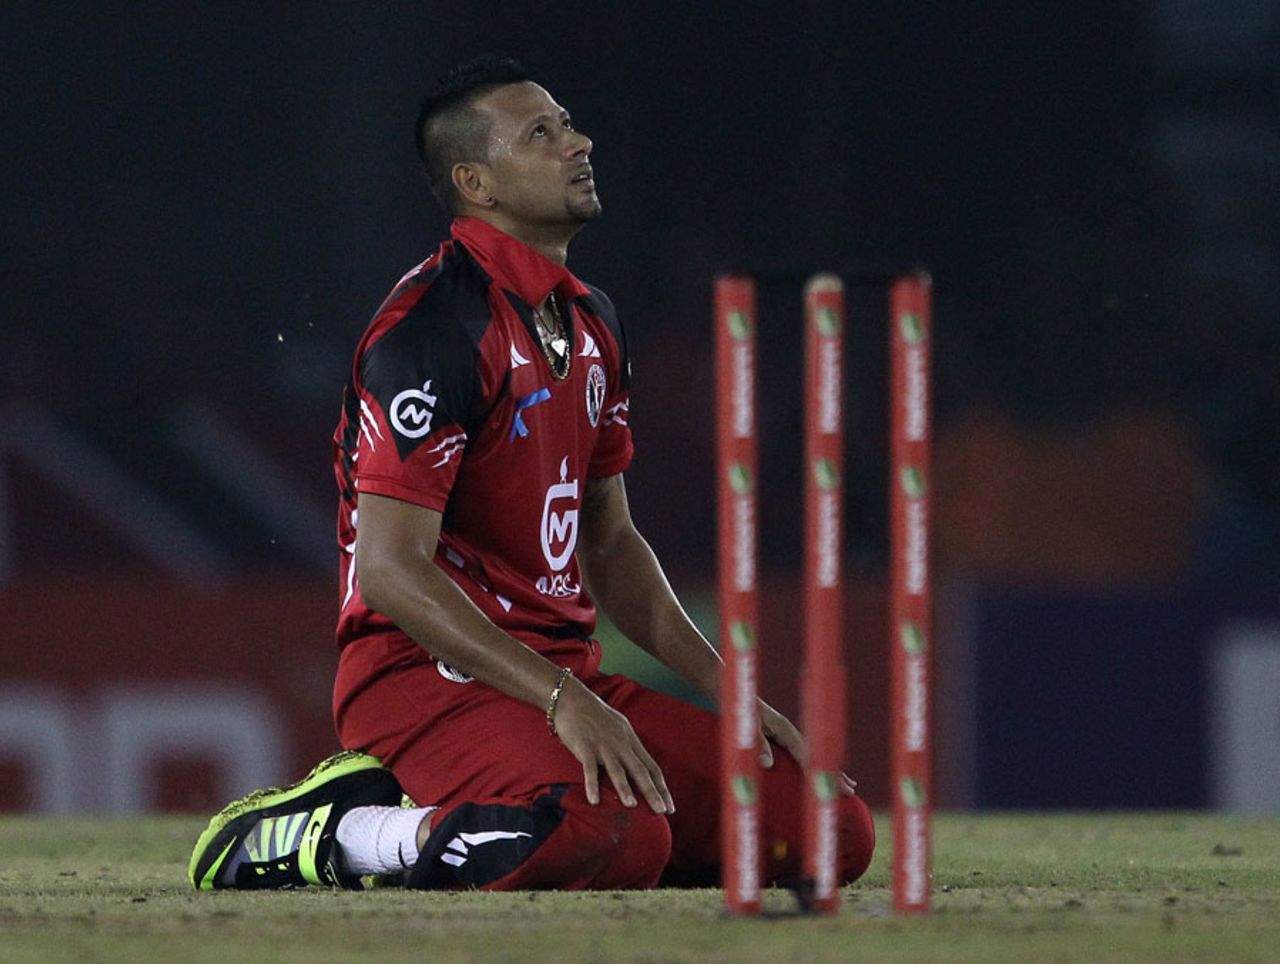 Rayad Emrit went wicketless in the innings, Trinidad & Tobago v Sunrisers Hyderabad, Group B, Champions League 2013, Mohali, September 24, 2013